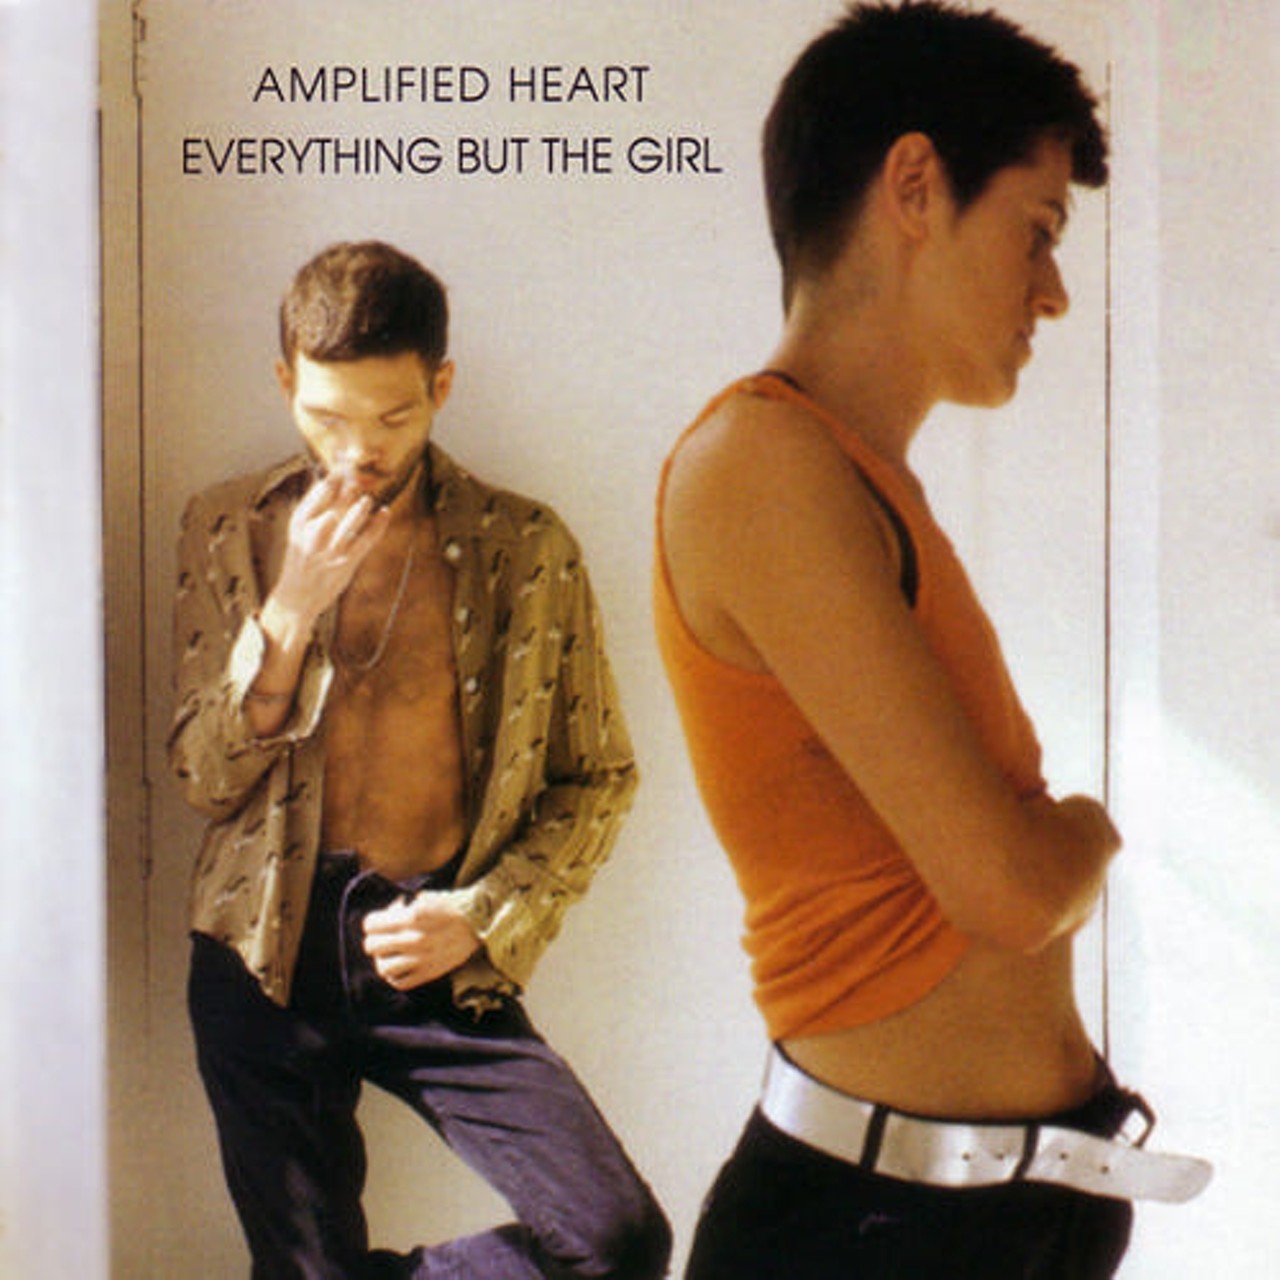 Everything But the Girl &#150; Amplified Heart
An album for the grieving.
